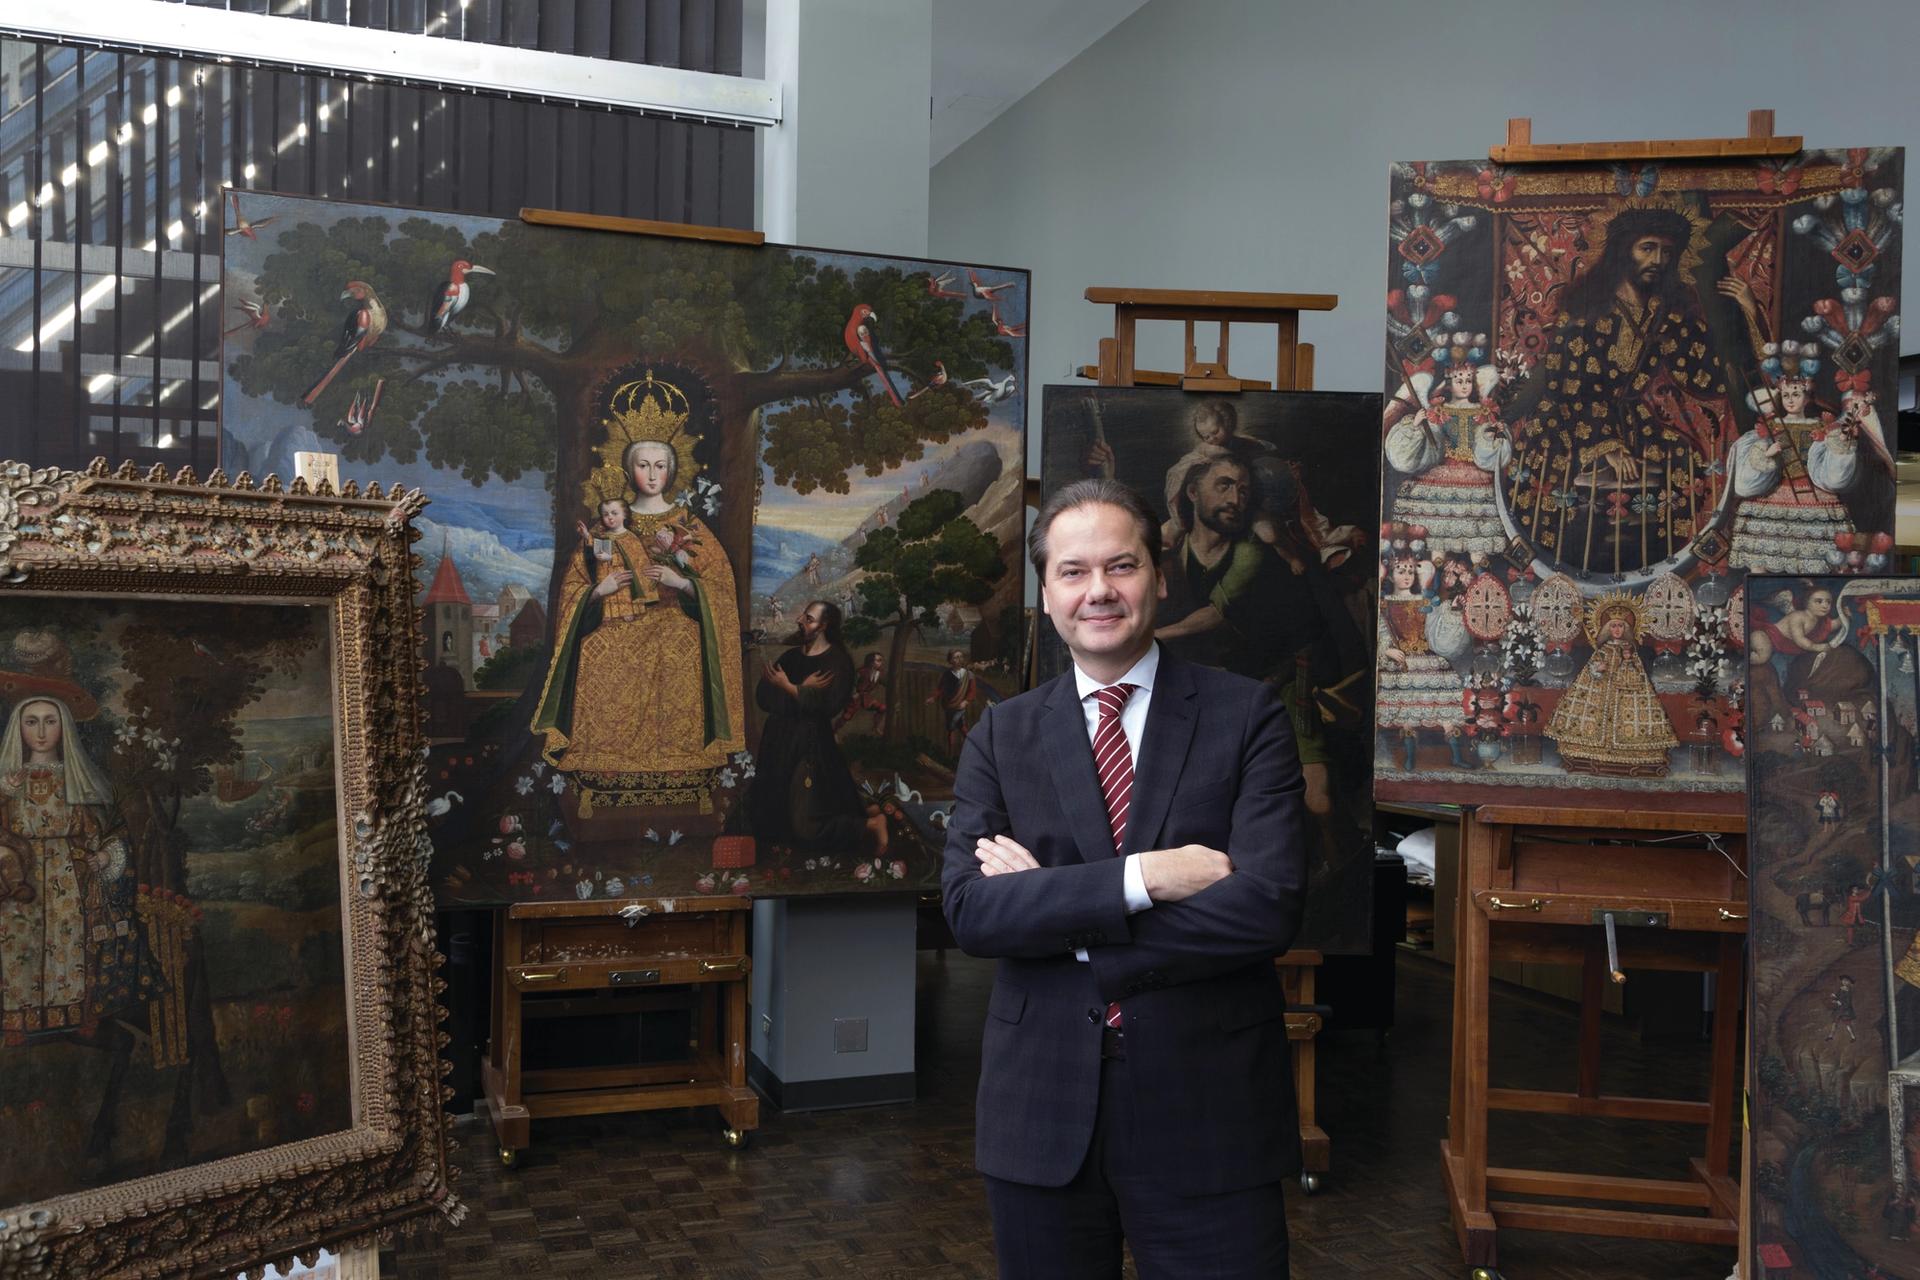 The Met's director Max Hollein with paintings from the James Kung Wei Li gift, including Our Lady of Mercy, called The Pilgrim of Quito (around 1720-30, far left in the frame) Our Lady of Valvanera (around 1770-80, large painting second from left) and  Saint Christopher (around 1710-20, behind Hollein) Credit: The Metropolitan Museum of Art, New York